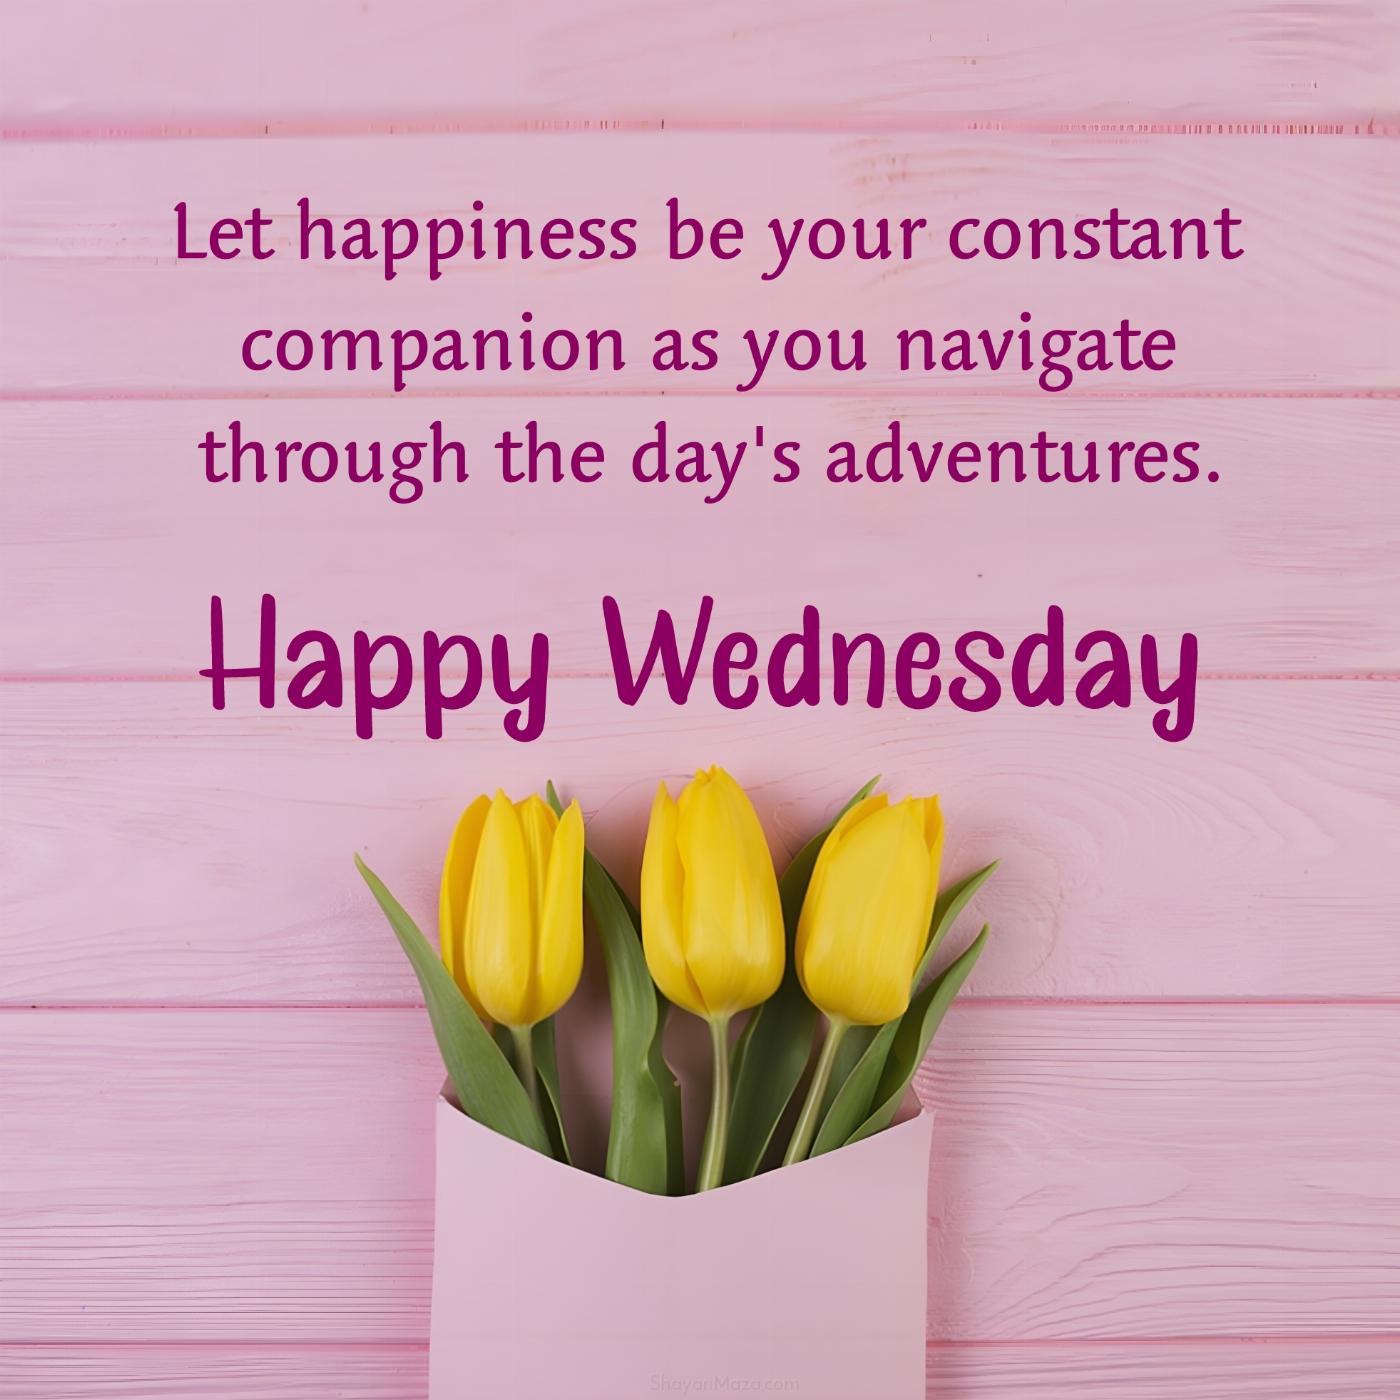 Happy Wednesday! Let happiness be your constant companion